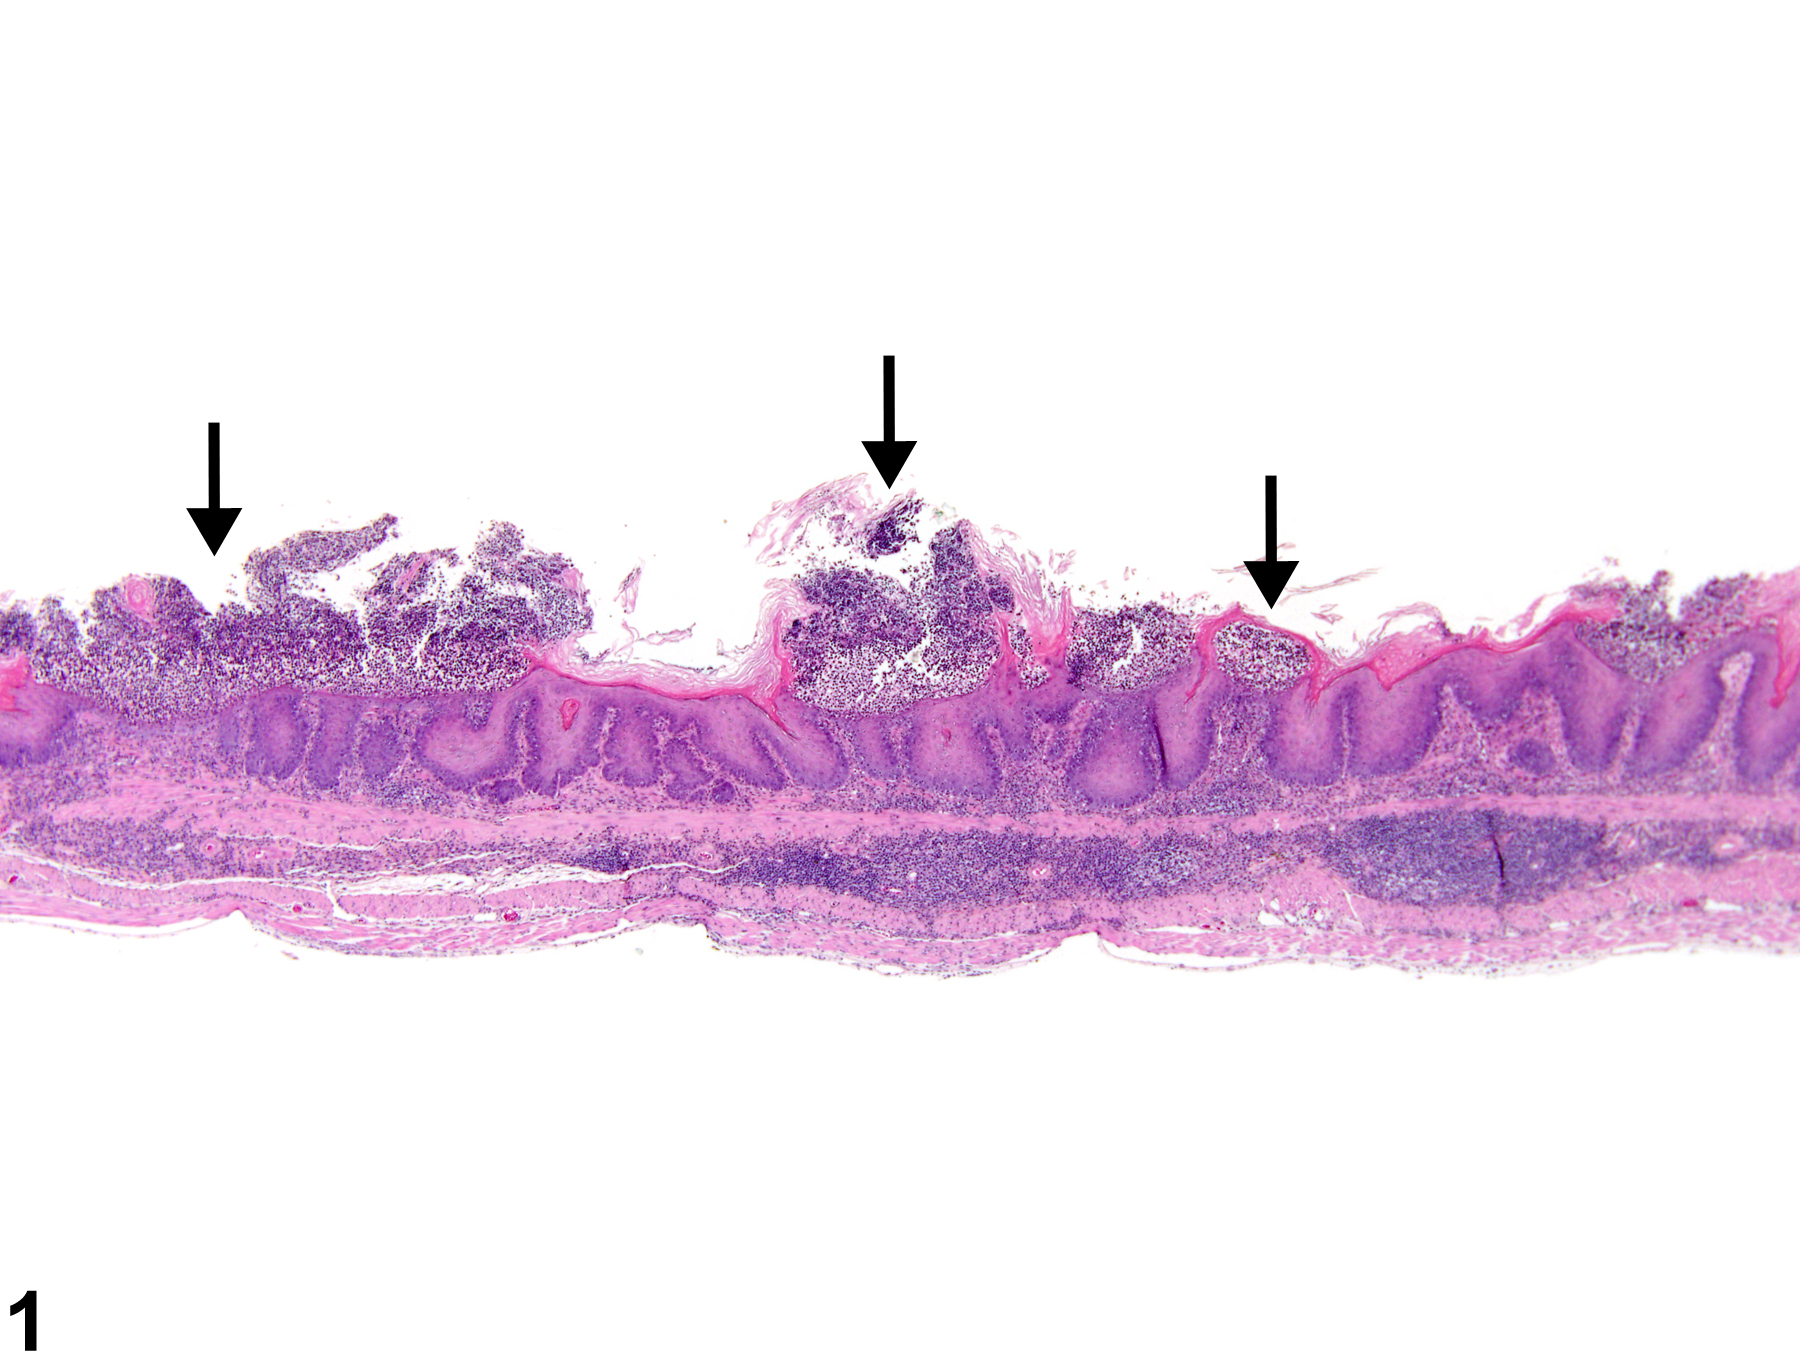 Image of erosion in the forestomach from a female B6C3F1 mouse in a chronic study